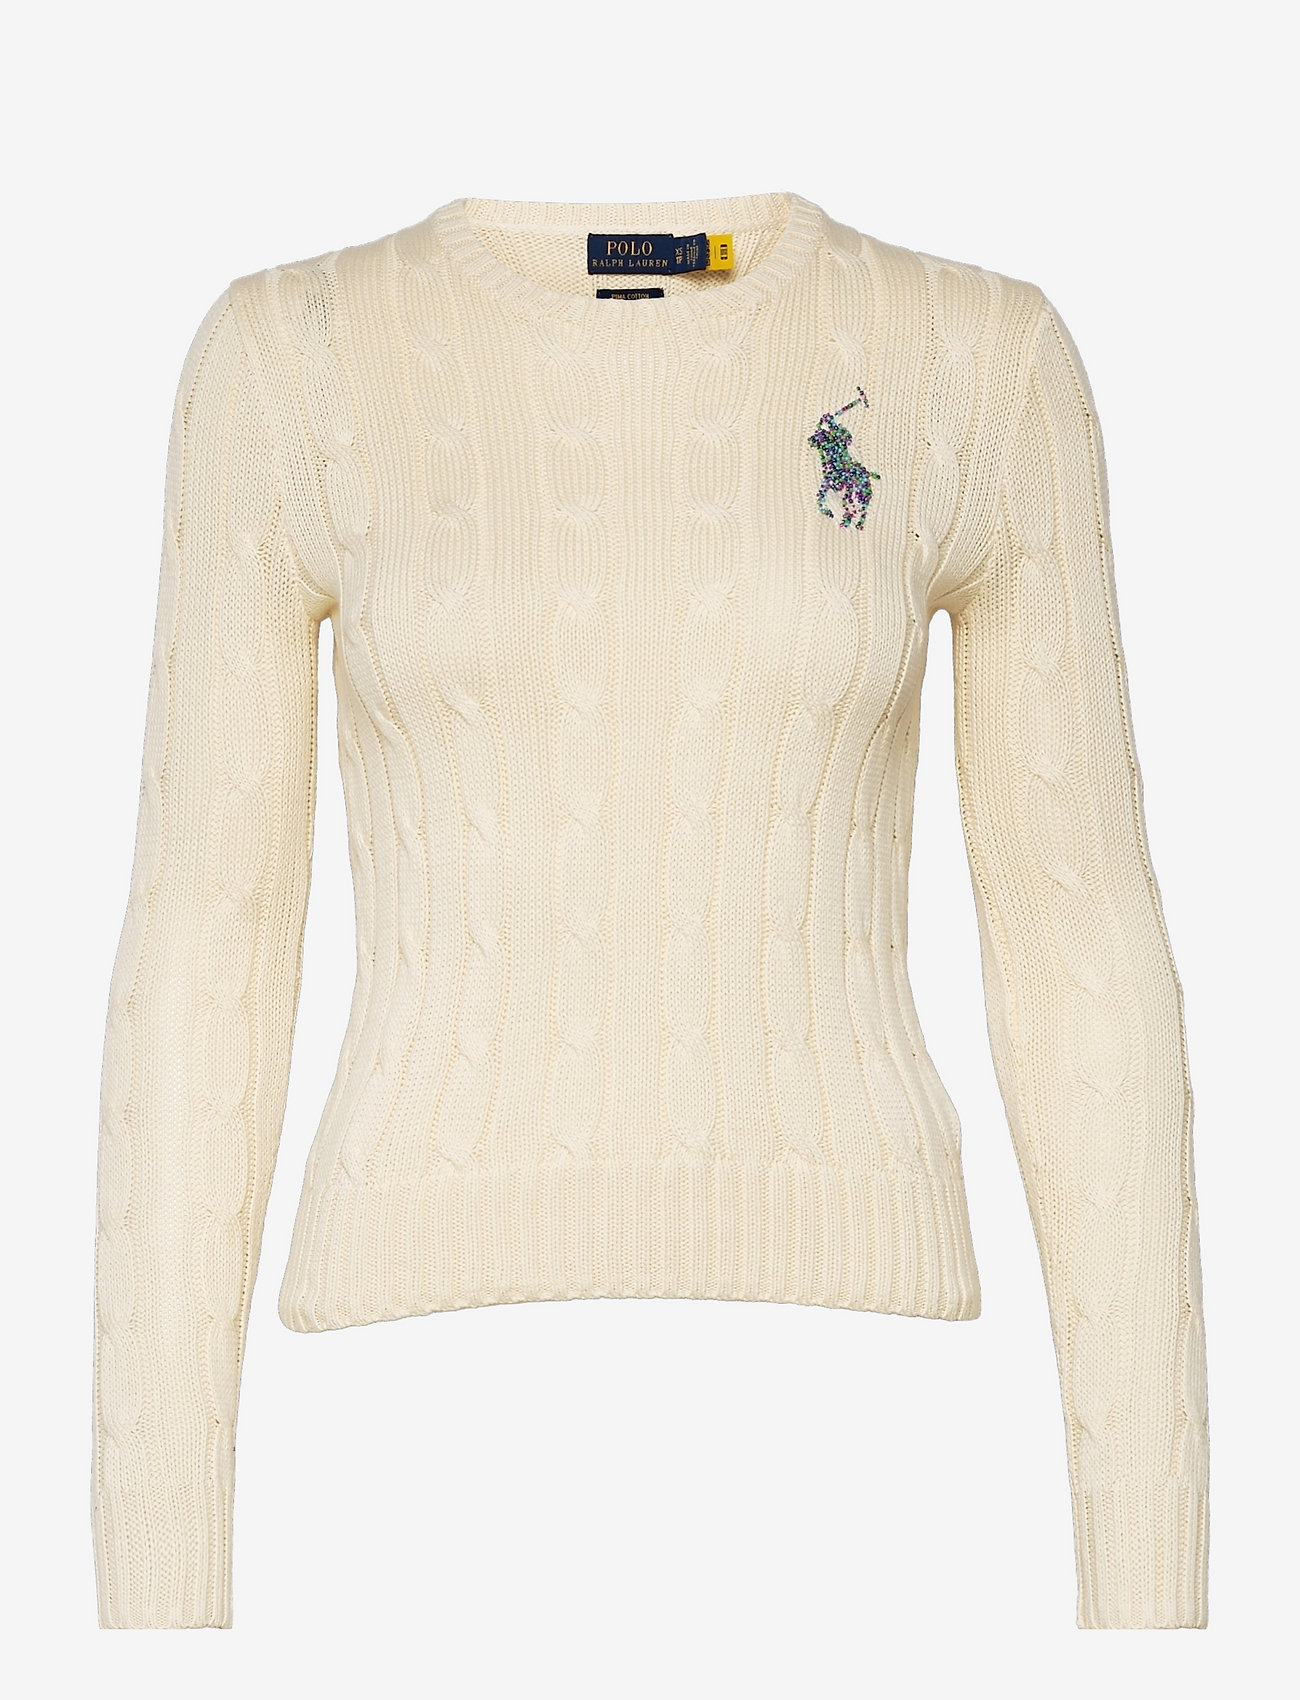 Polo Ralph Lauren - Beaded Big Pony Cable-Knit Sweater - jumpers - cream multi - 0